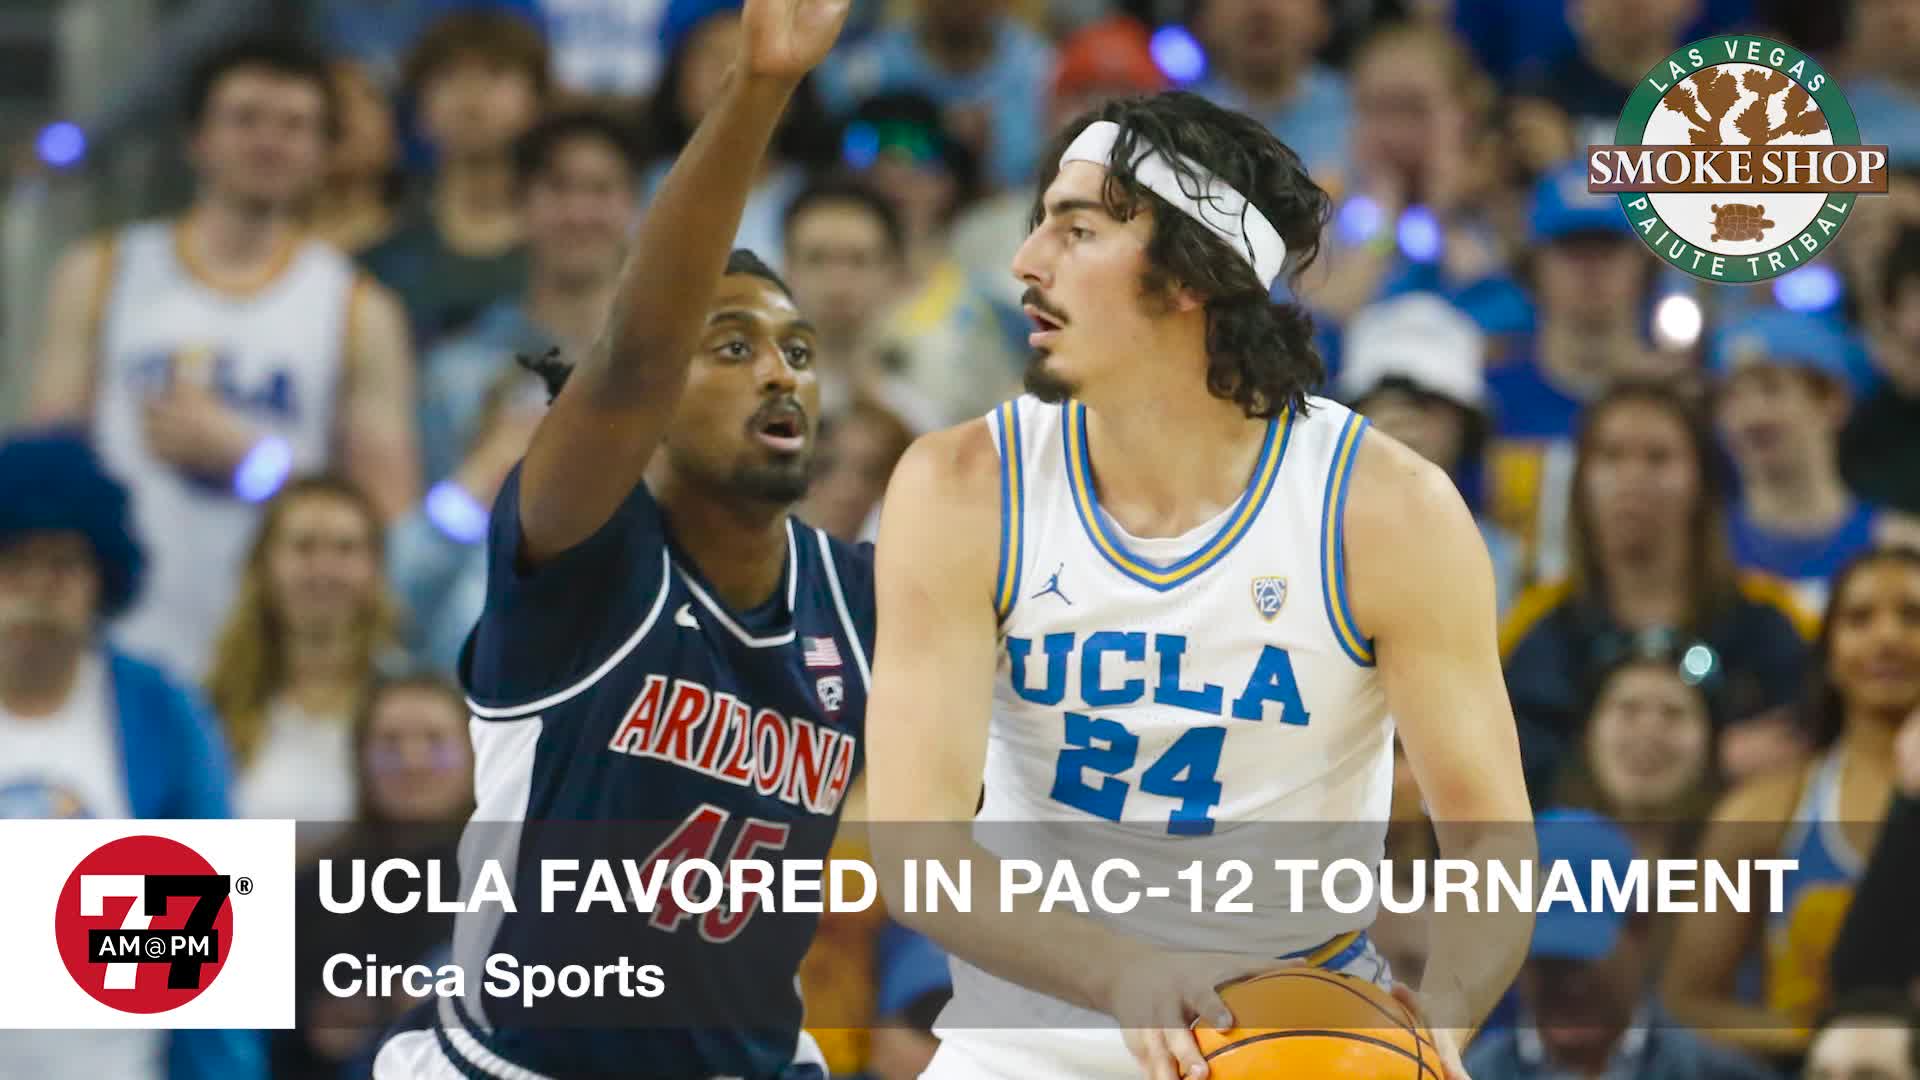 UCLA favored in Pac-12 tournament